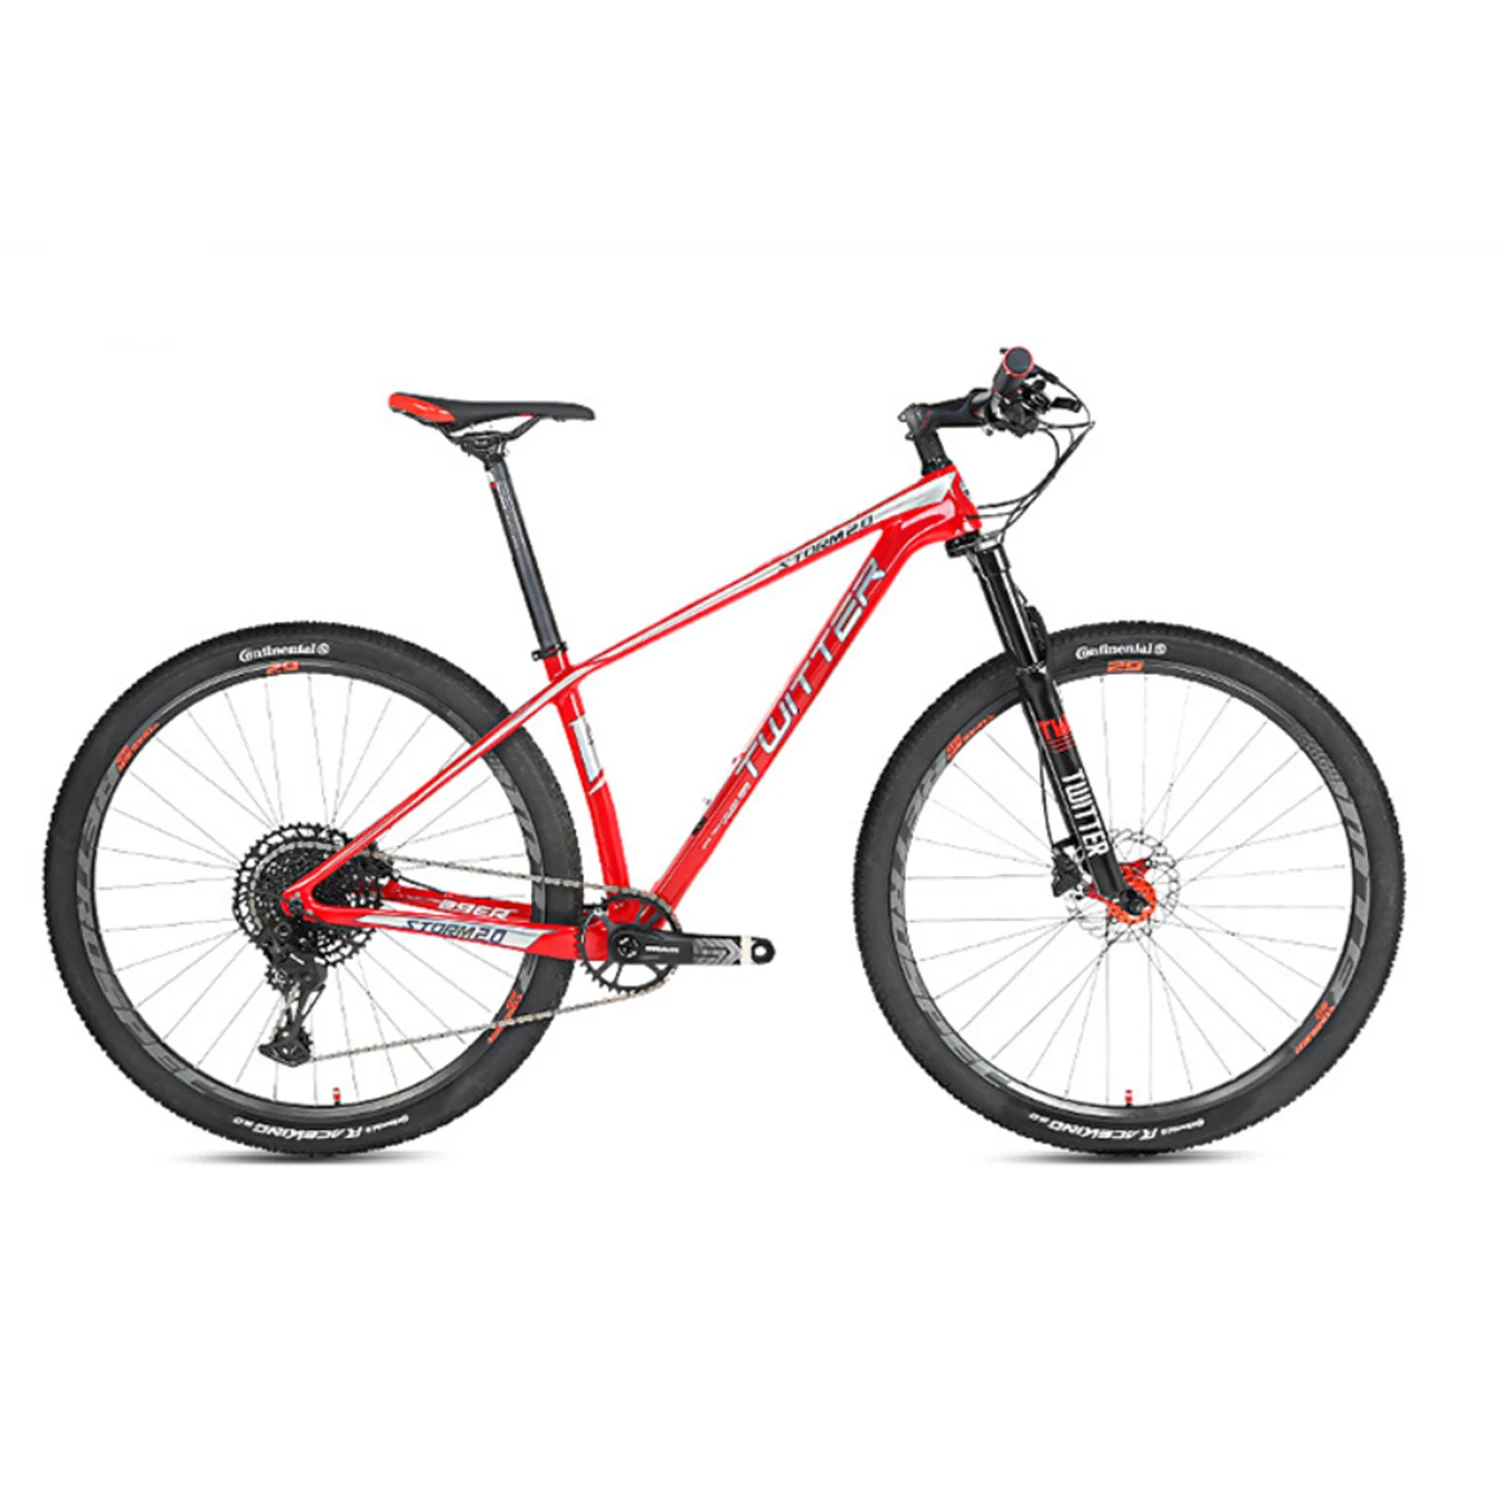 

Twitter STORM2.0 EF505-27S China bicycle factory price 27.5 29er mtb mountain bike carbon, Red/blue/silver/black/blackred / black silve /black blue/white red